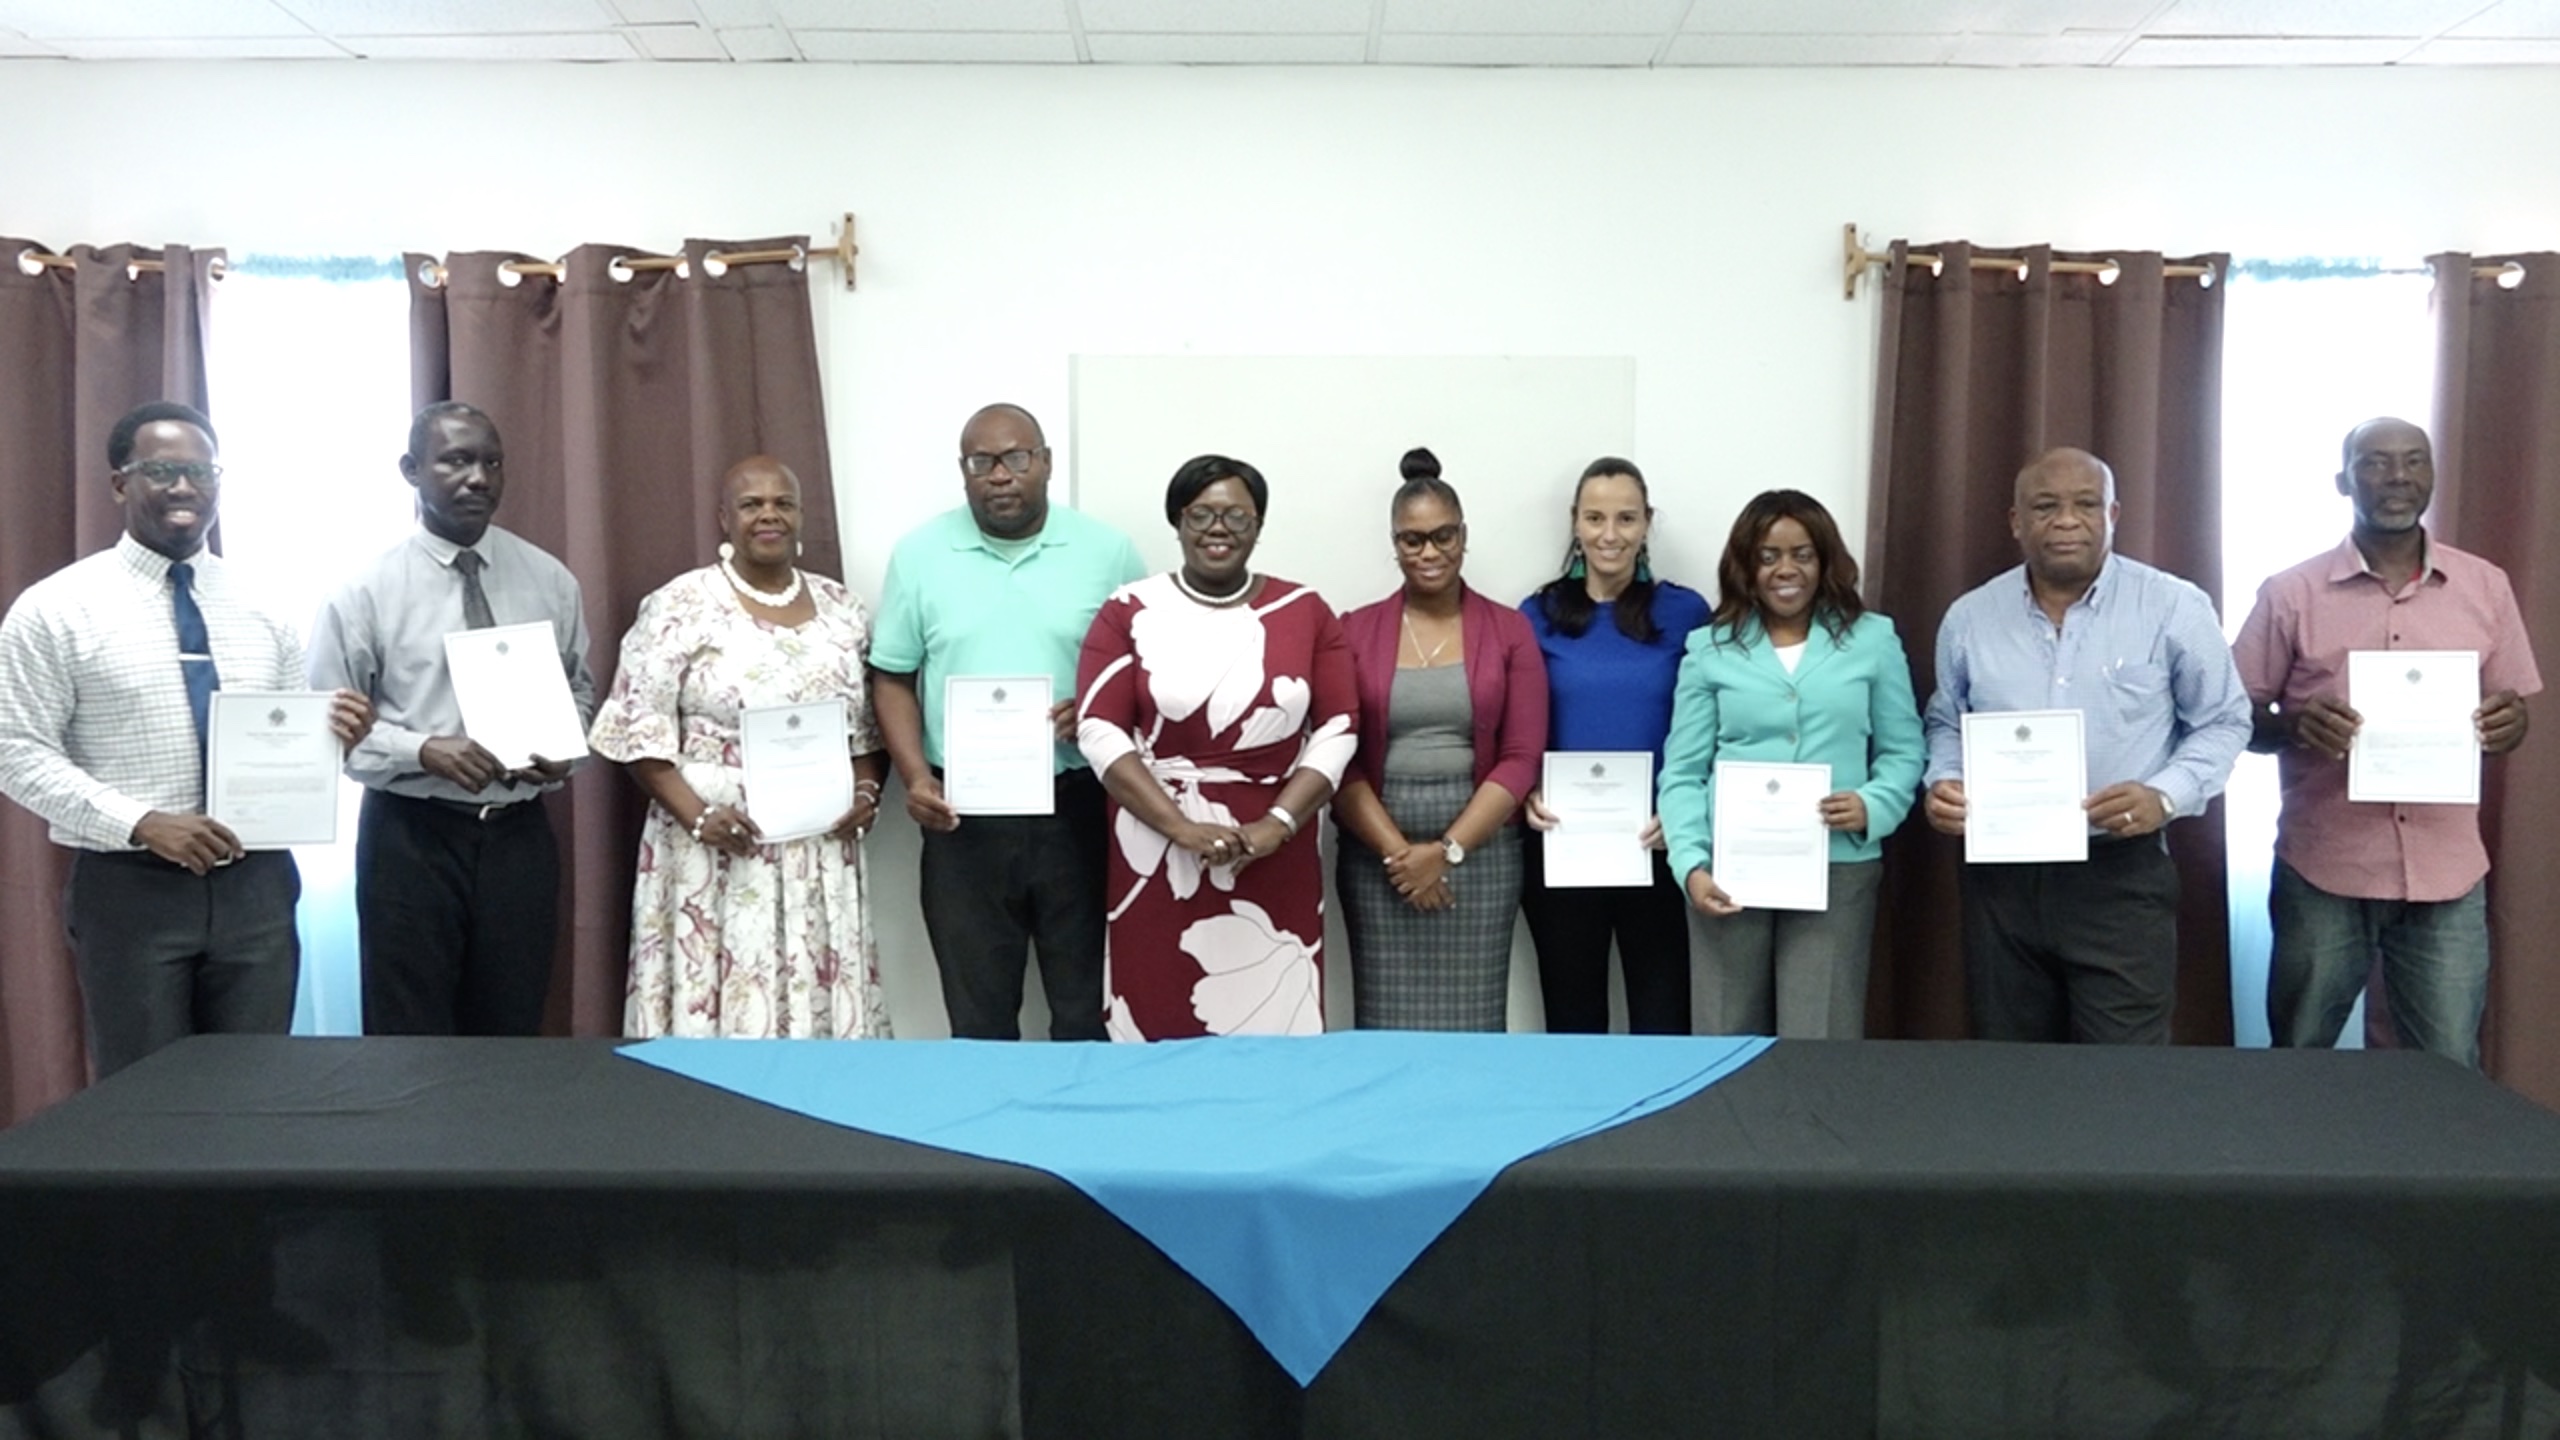 Hon. Hazel Brandy-Williams, Junior Minister of Health and Gender Affairs fifth from left, and Ms. Latoya Jeffers, Assistant Secretary in the ministry (fifth from right; sharing a light moment with the eight newly installed members to serve on the Advisory Board for the Nevis Mentorship Programme from May 19, 2022, (l-r) Mr. Mario Phillip, Gender Officer in the Department of Gender Affairs; Mr. John Hanley, Permanent Secretary in the Ministry of Tourism; Ms. Agnola Hendrickson from the Bank of Nevis International; Mr. Jamir Claxton, Director of Sports; Ms. Joy Napier, Principal of the Nevis International Secondary School; Ms. Jasmine Browne, Counsellor; Mr. Hensley Daniel; and Mr. Alexis Browne